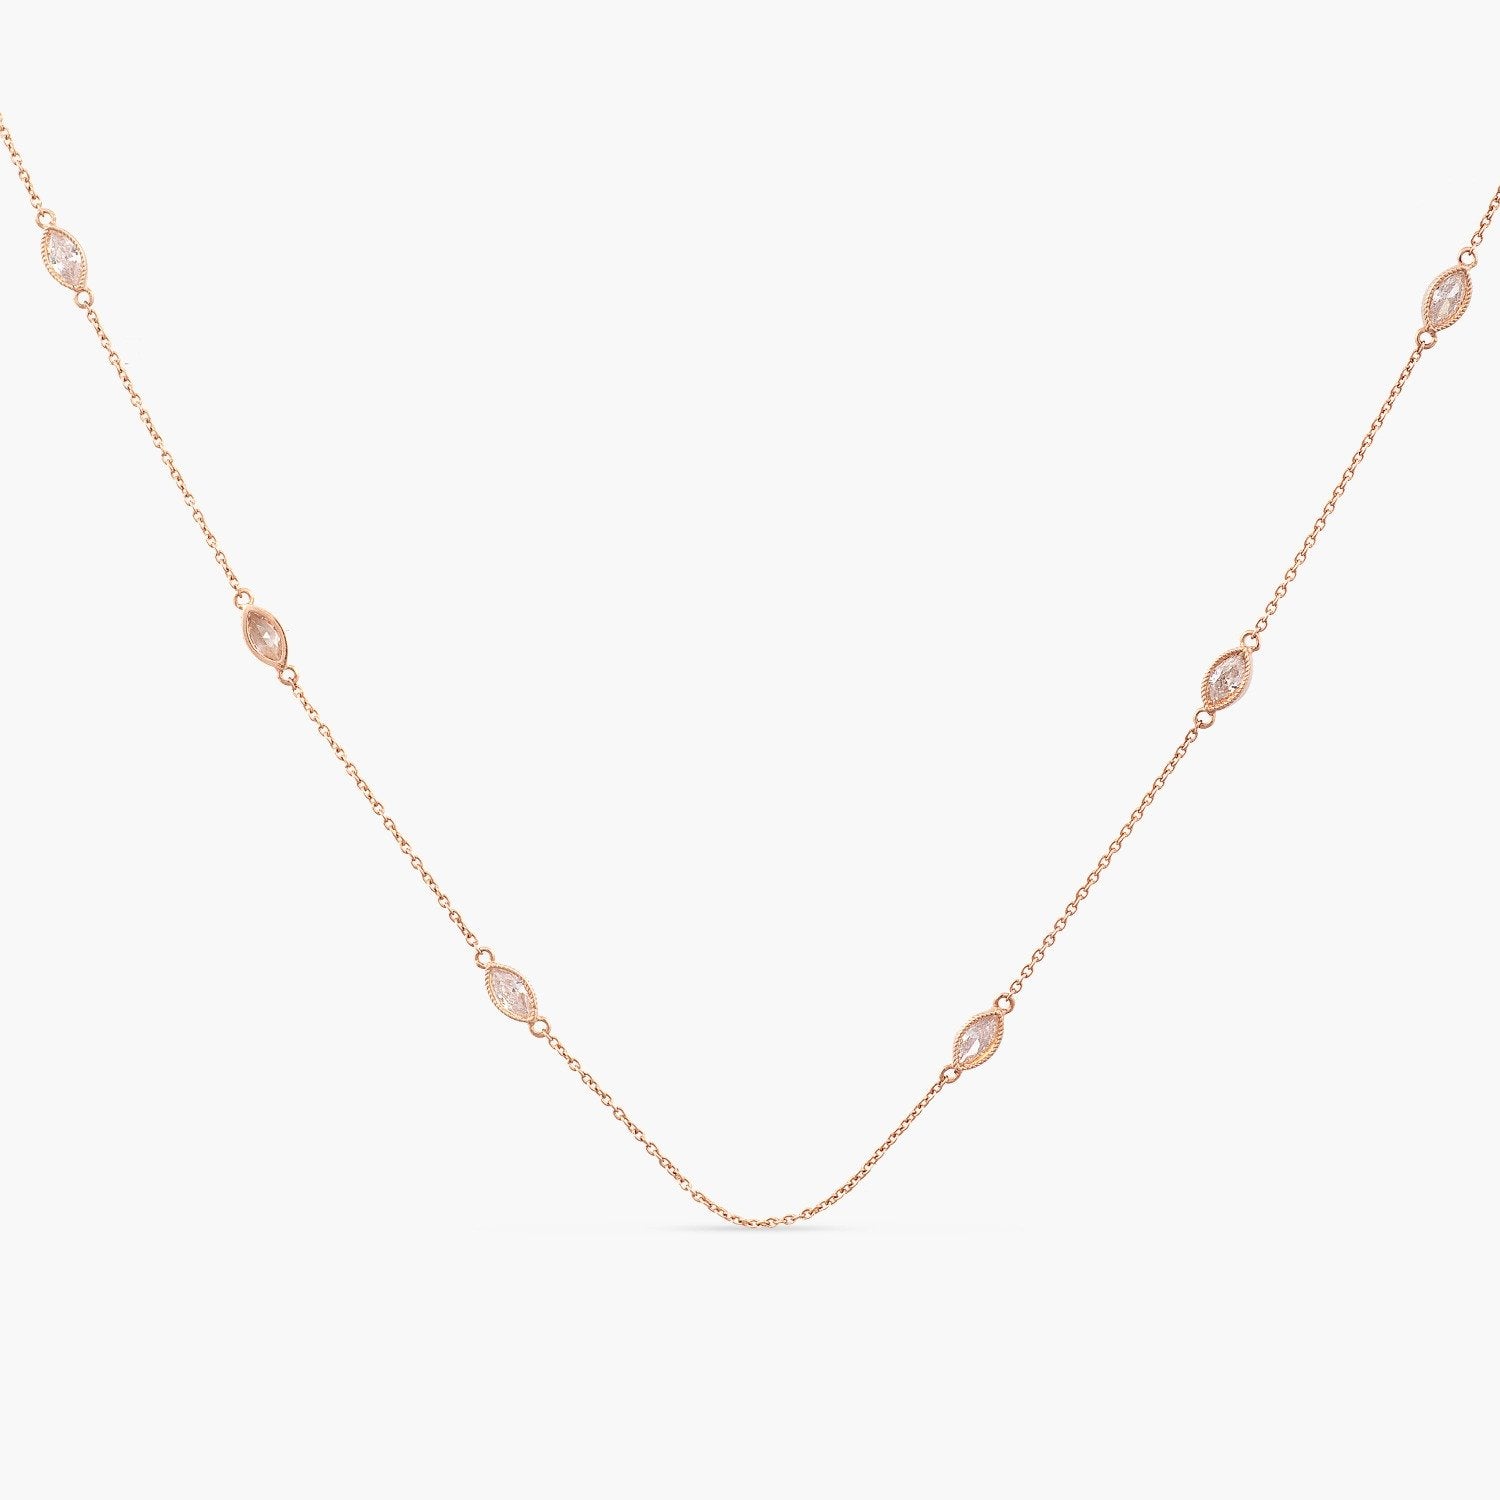 Mira CZ Silver Necklace